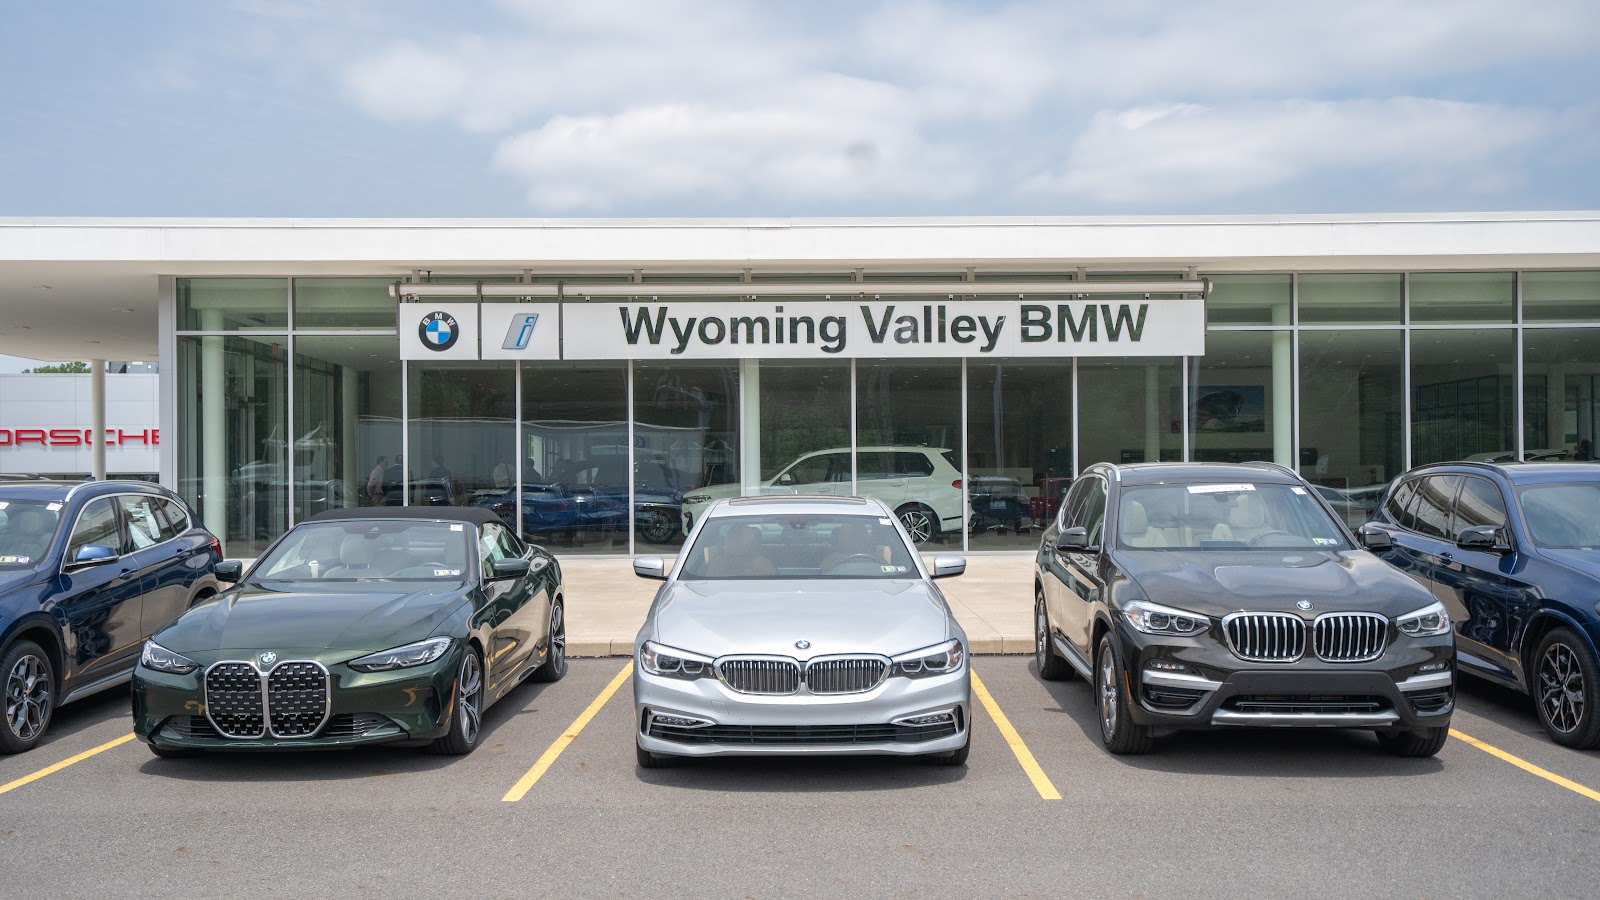 Wyoming Valley BMW